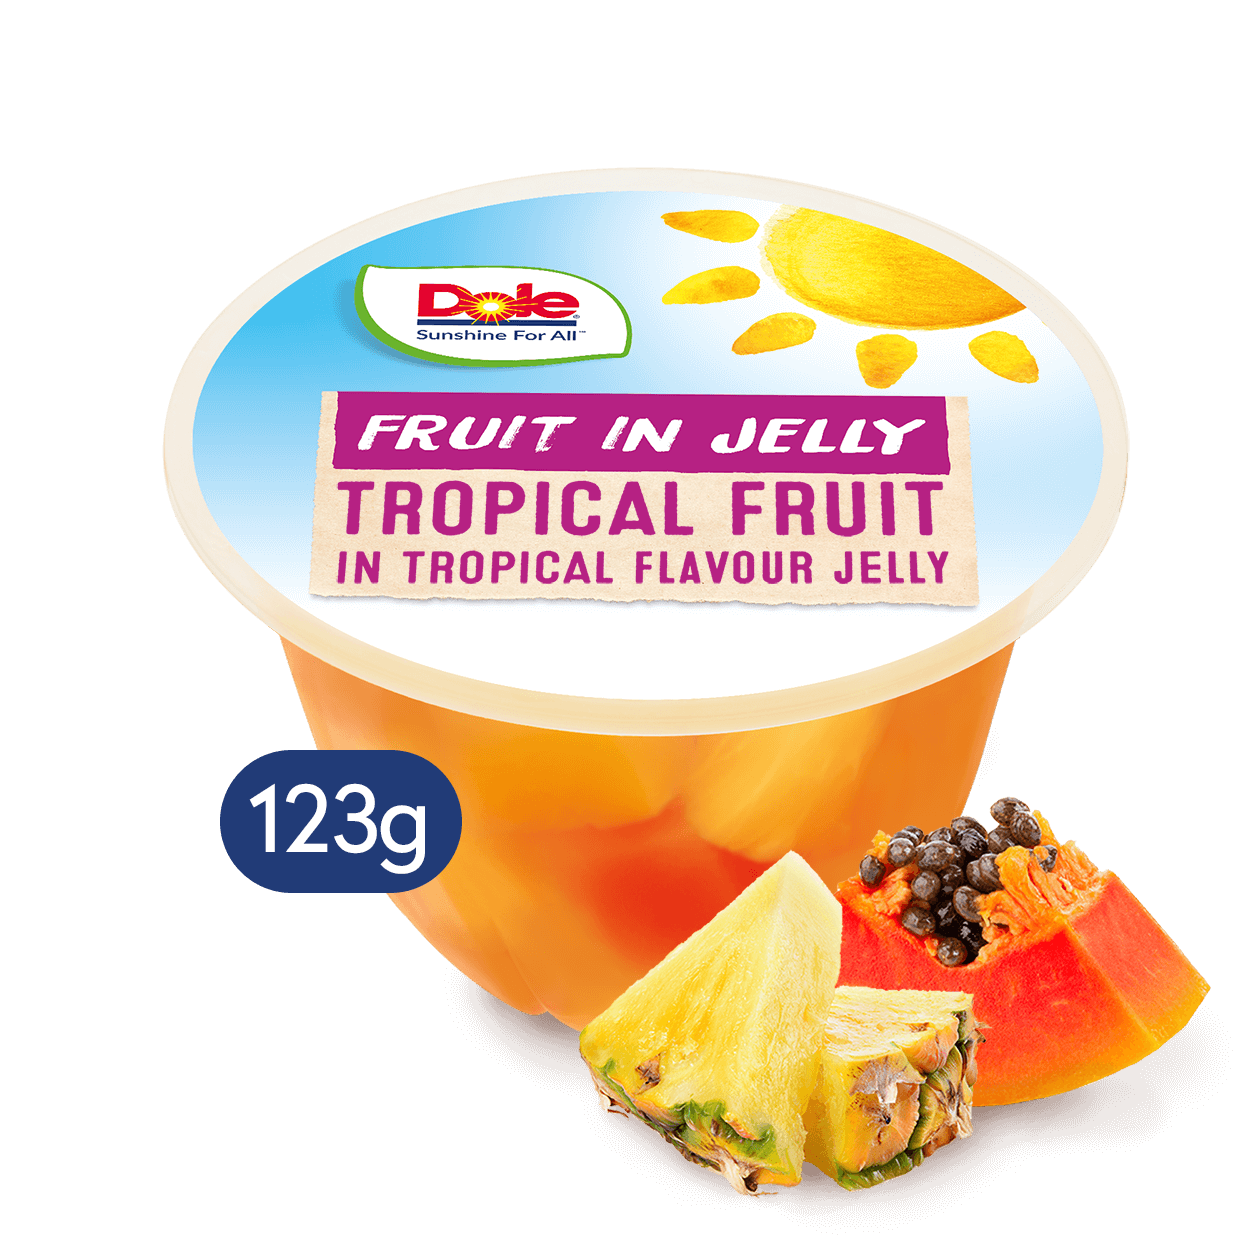 Dole Tropical Fruit in Tropical Jelly Fruit Snacks 123g - Dole